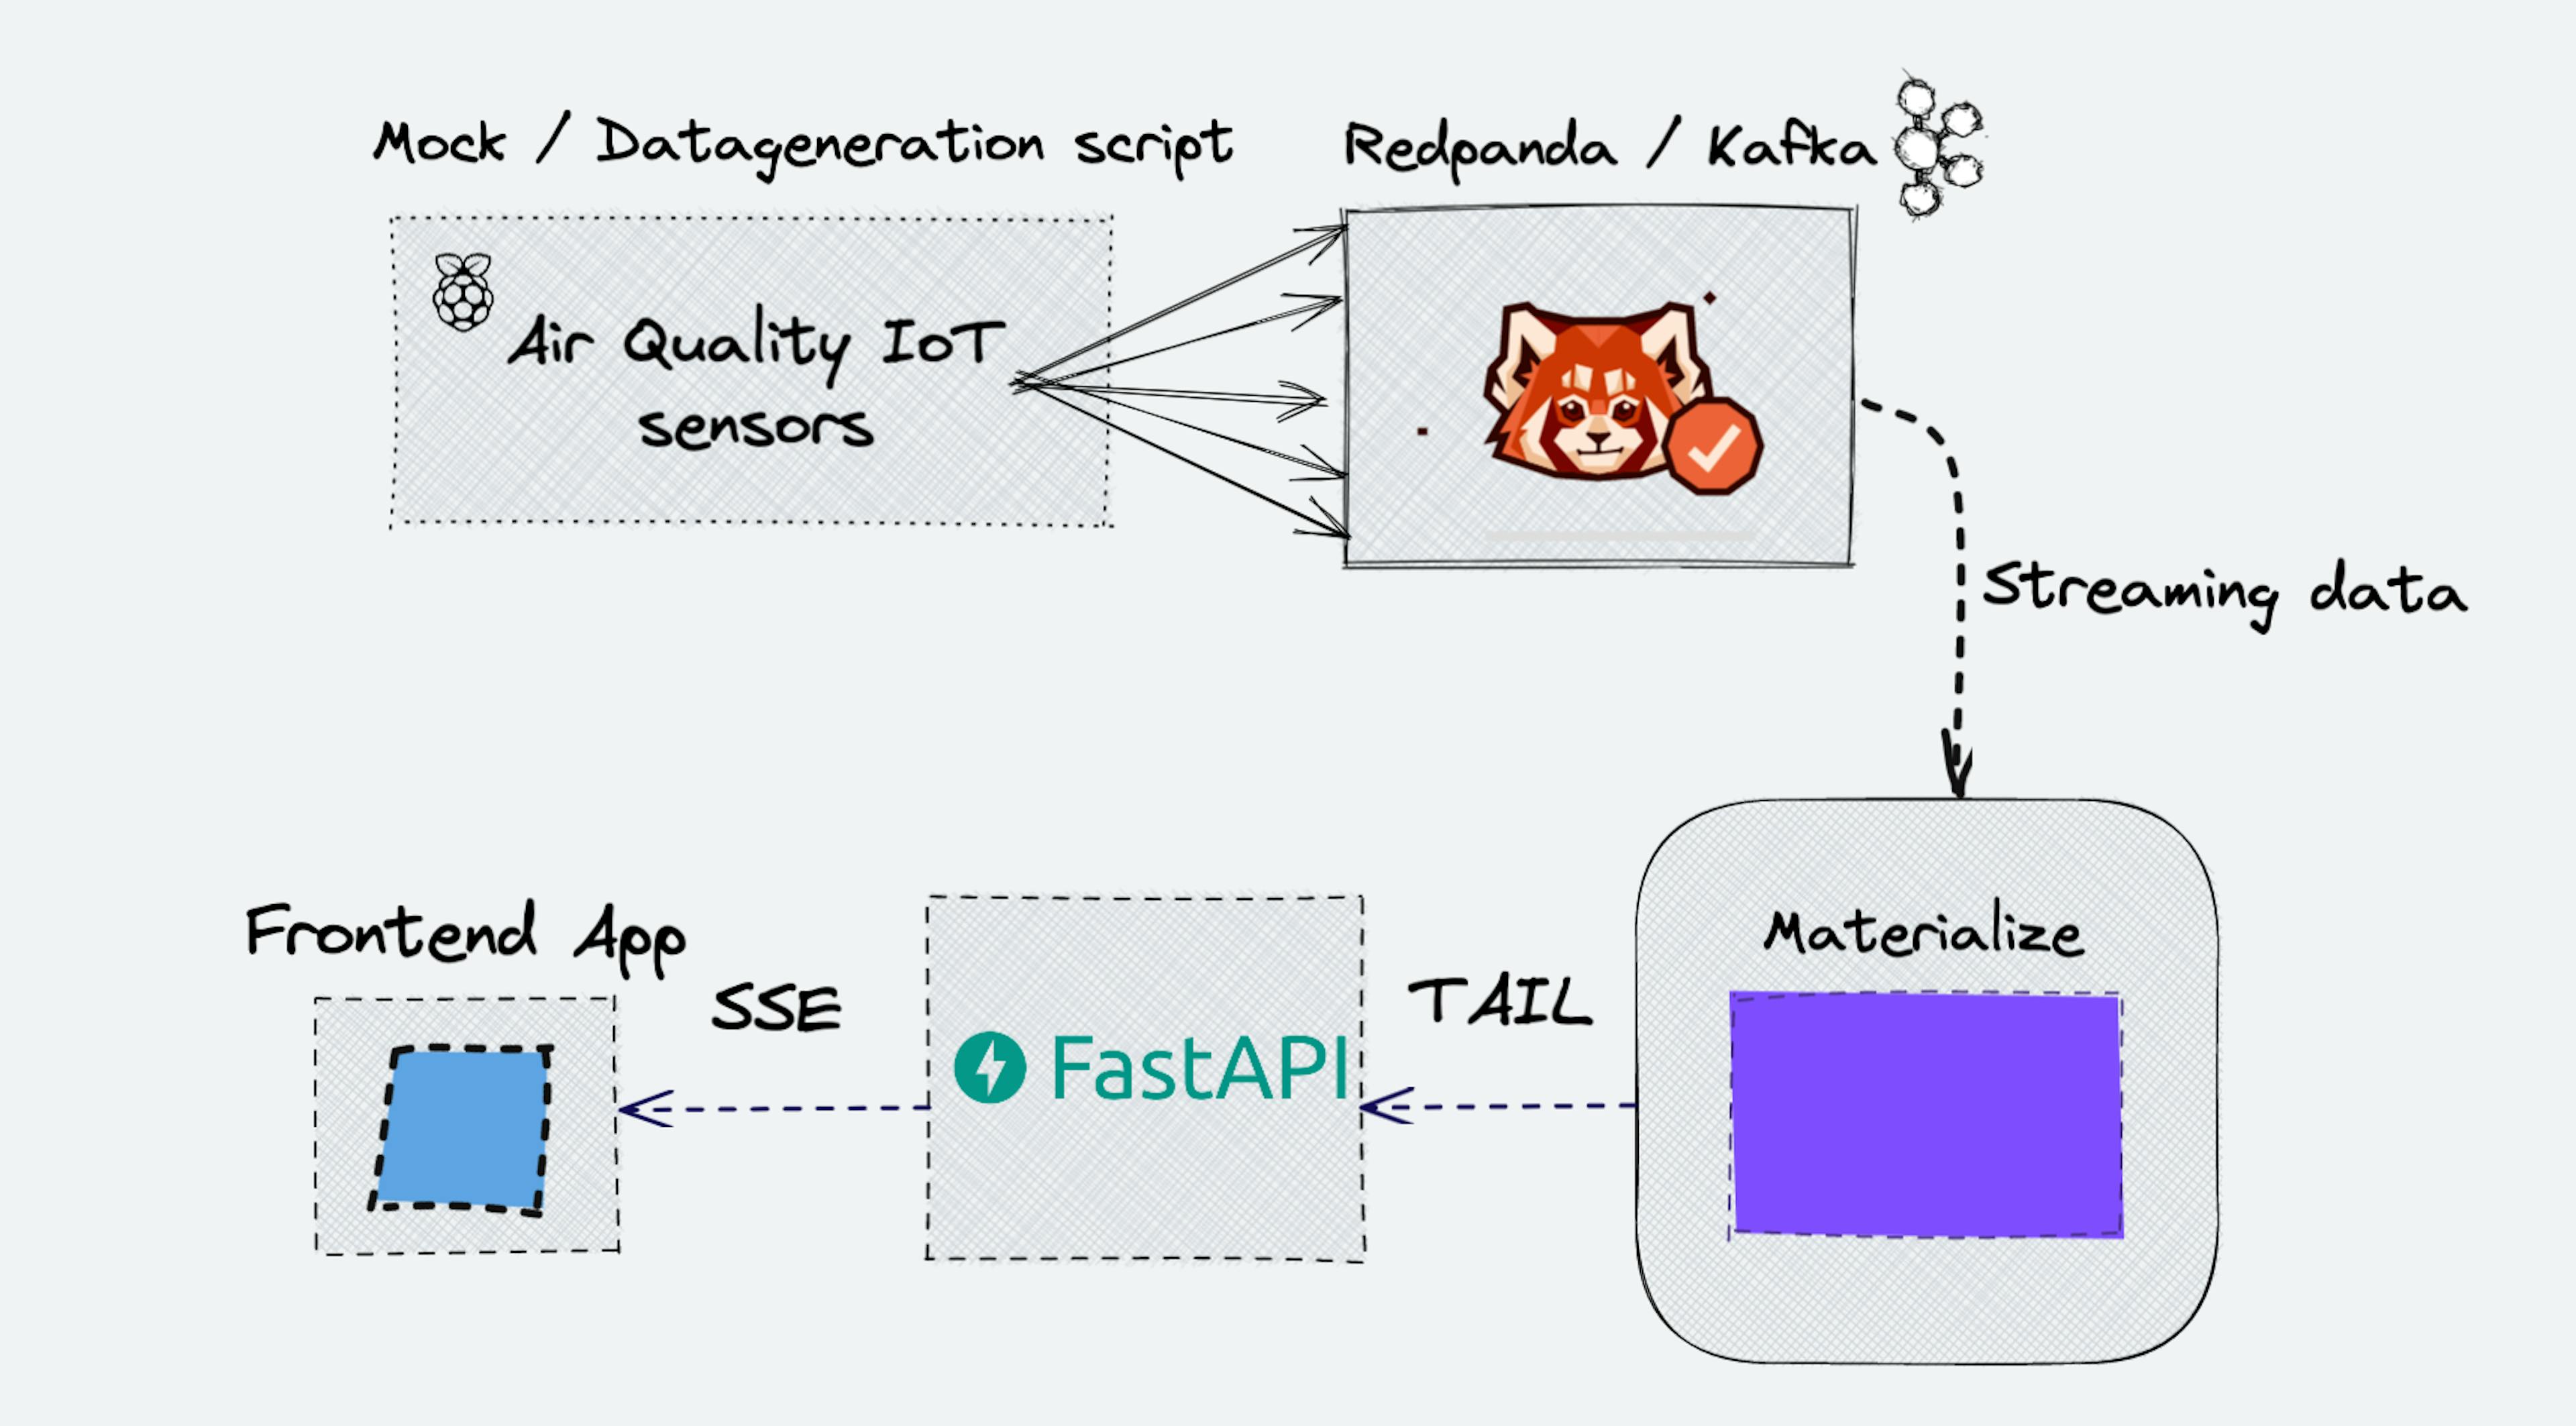 FastAPI with Materialize